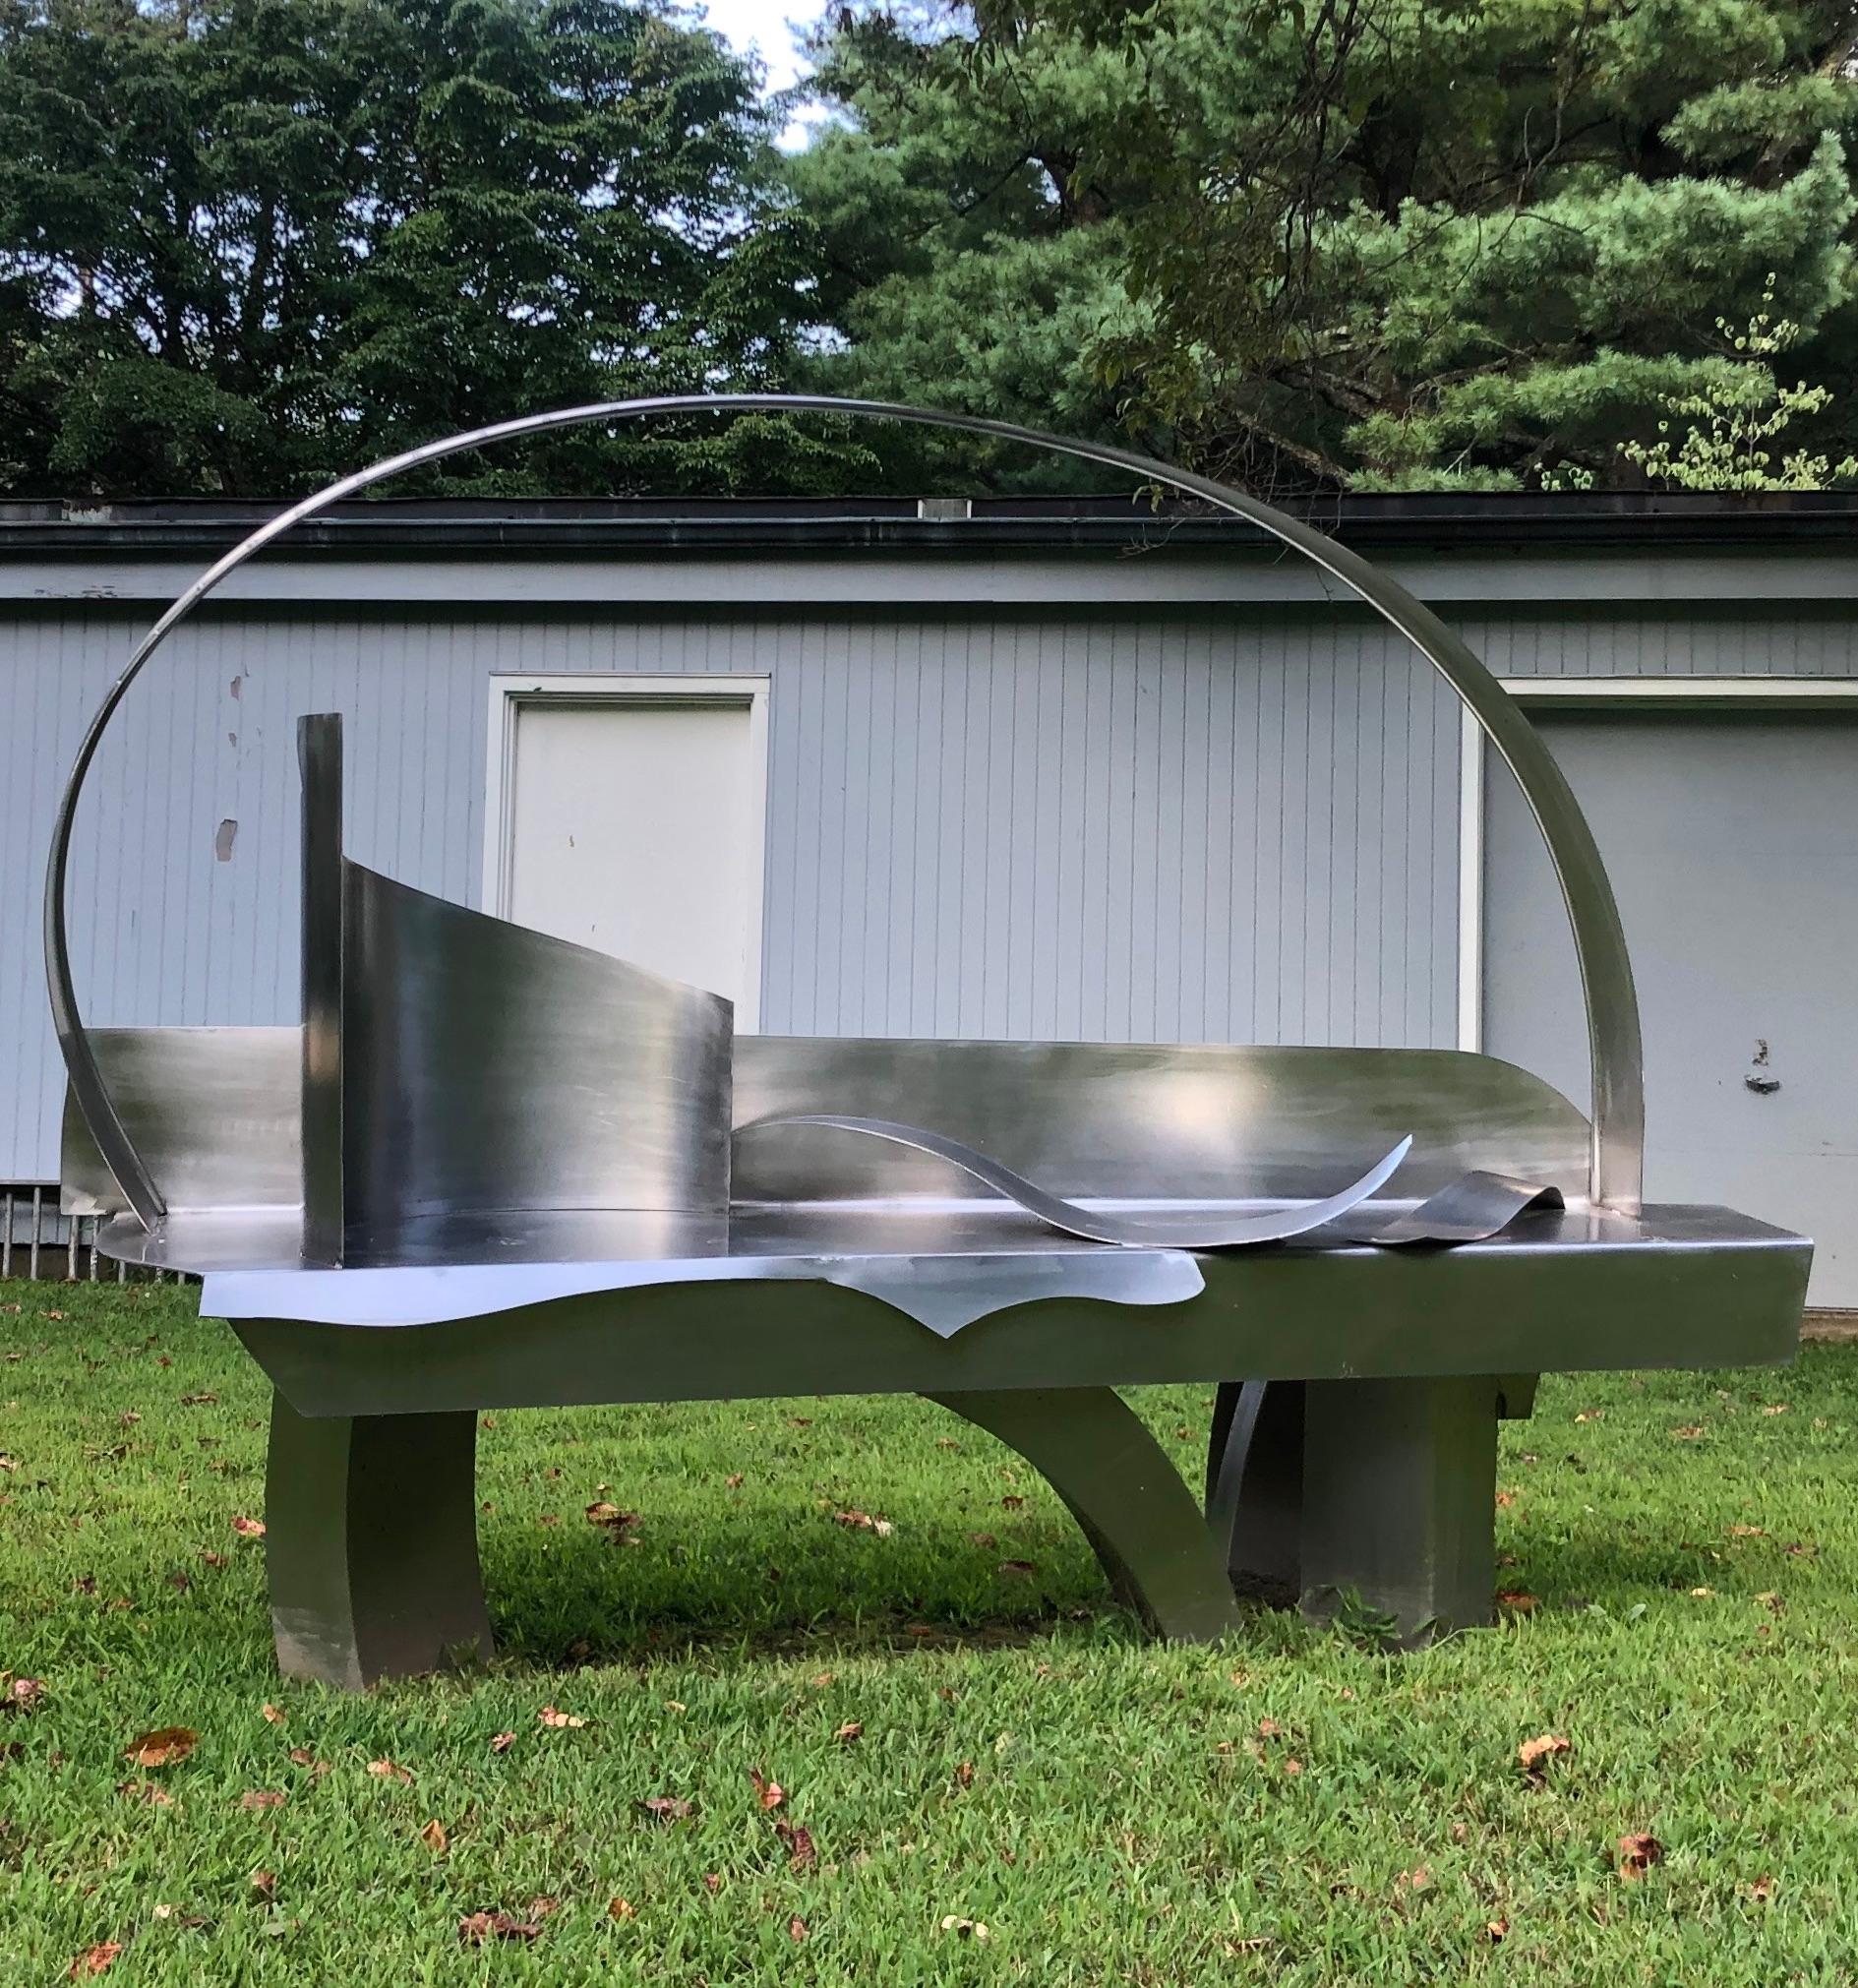 A large-scale steel sculpture by Naomi Press. Signed with initials.

Naomi Press is a female abstract sculptor, who was one of the very few women working in large scale with steel in the second half of the 20th Century. Press’s art was admired by a